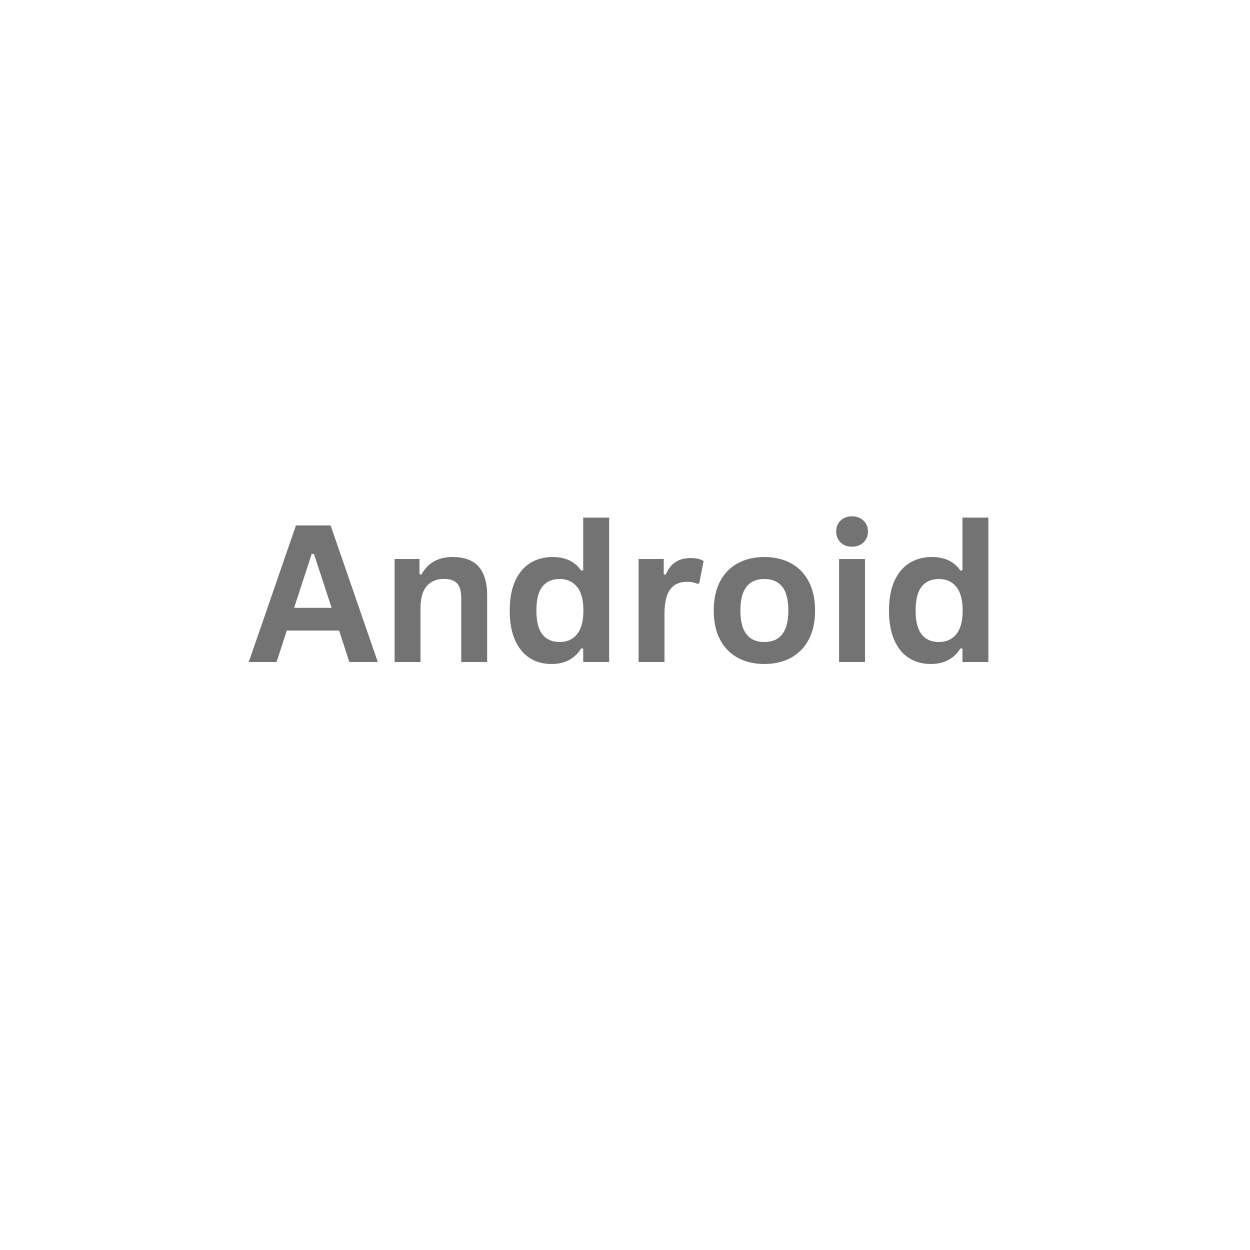 Androidn